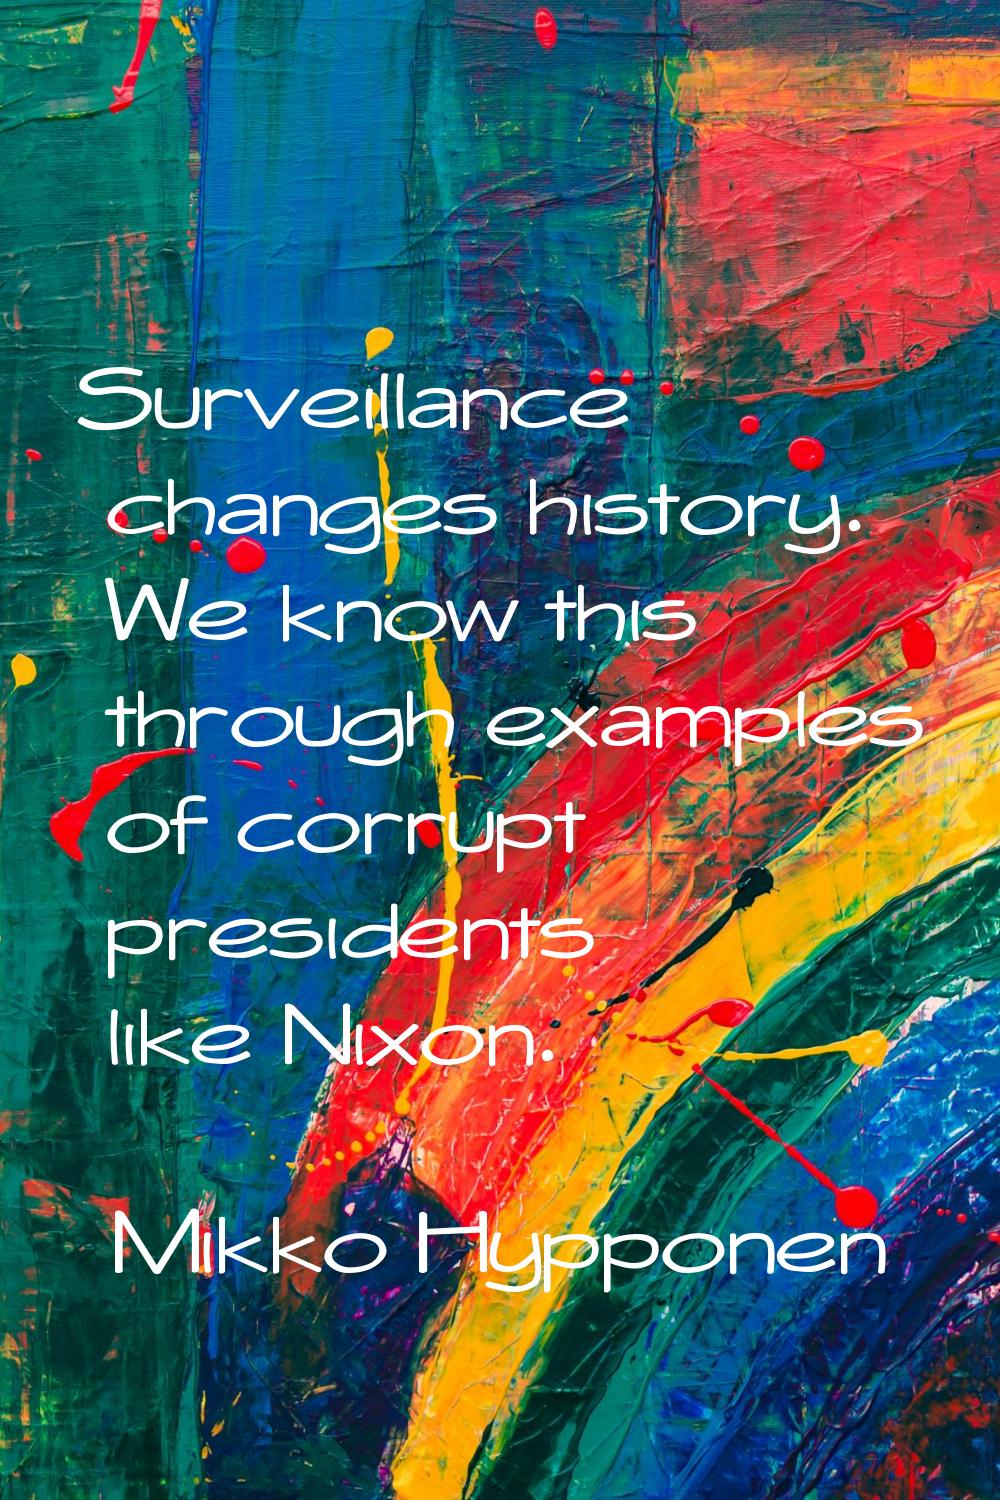 Surveillance changes history. We know this through examples of corrupt presidents like Nixon.